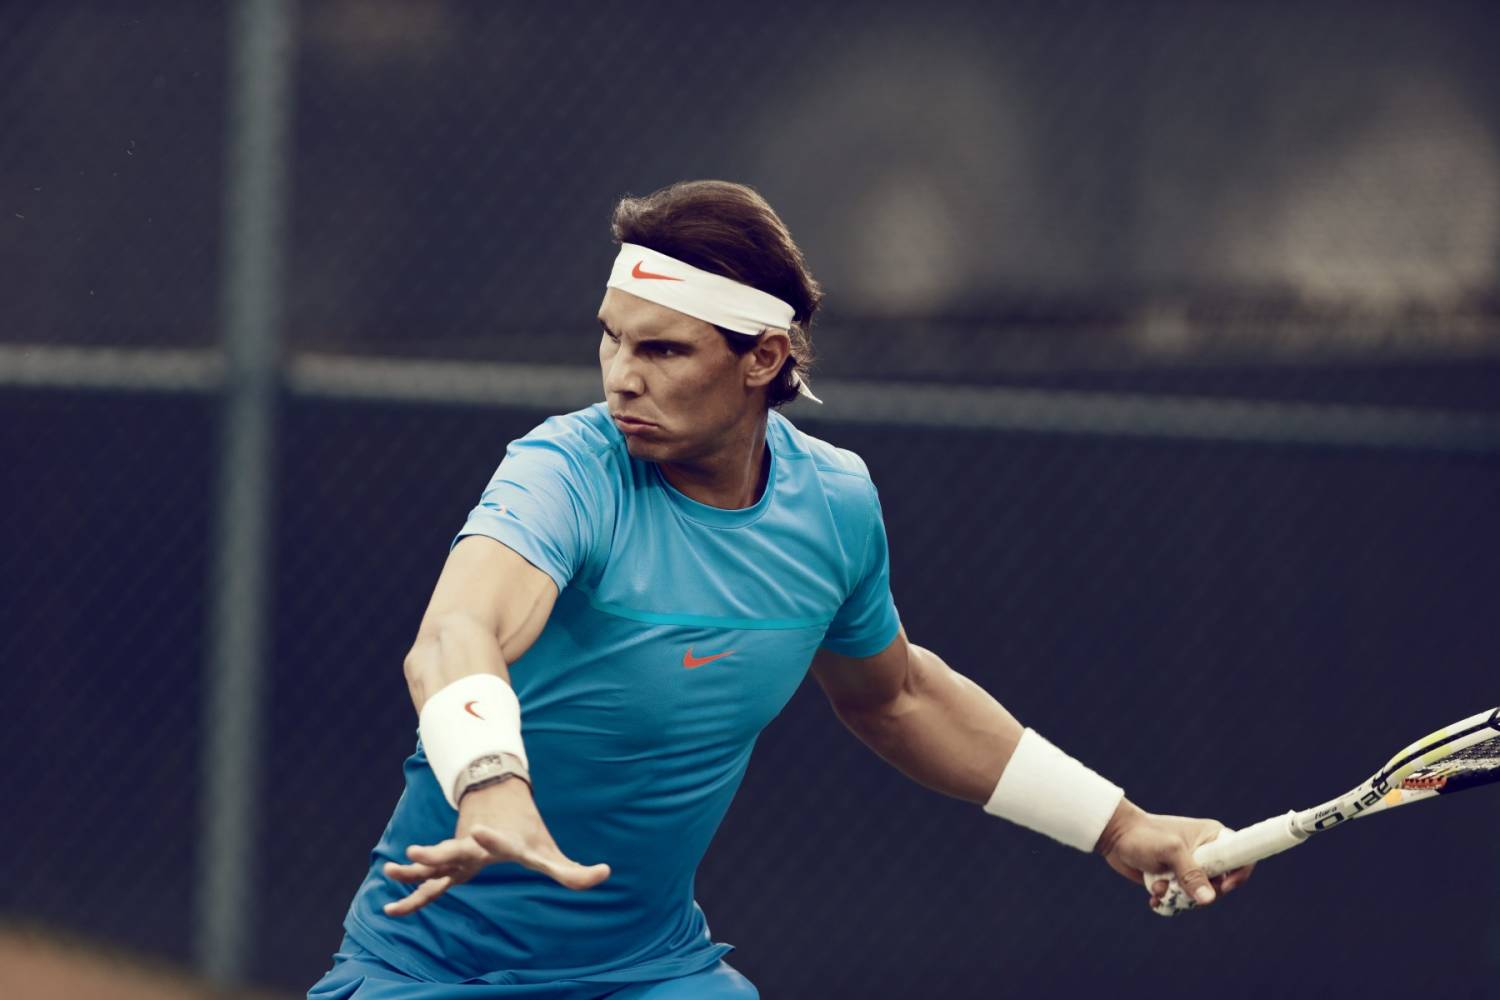 Rafael Nadal's Nike outfit for Roland Garros 2015 Мая 2015